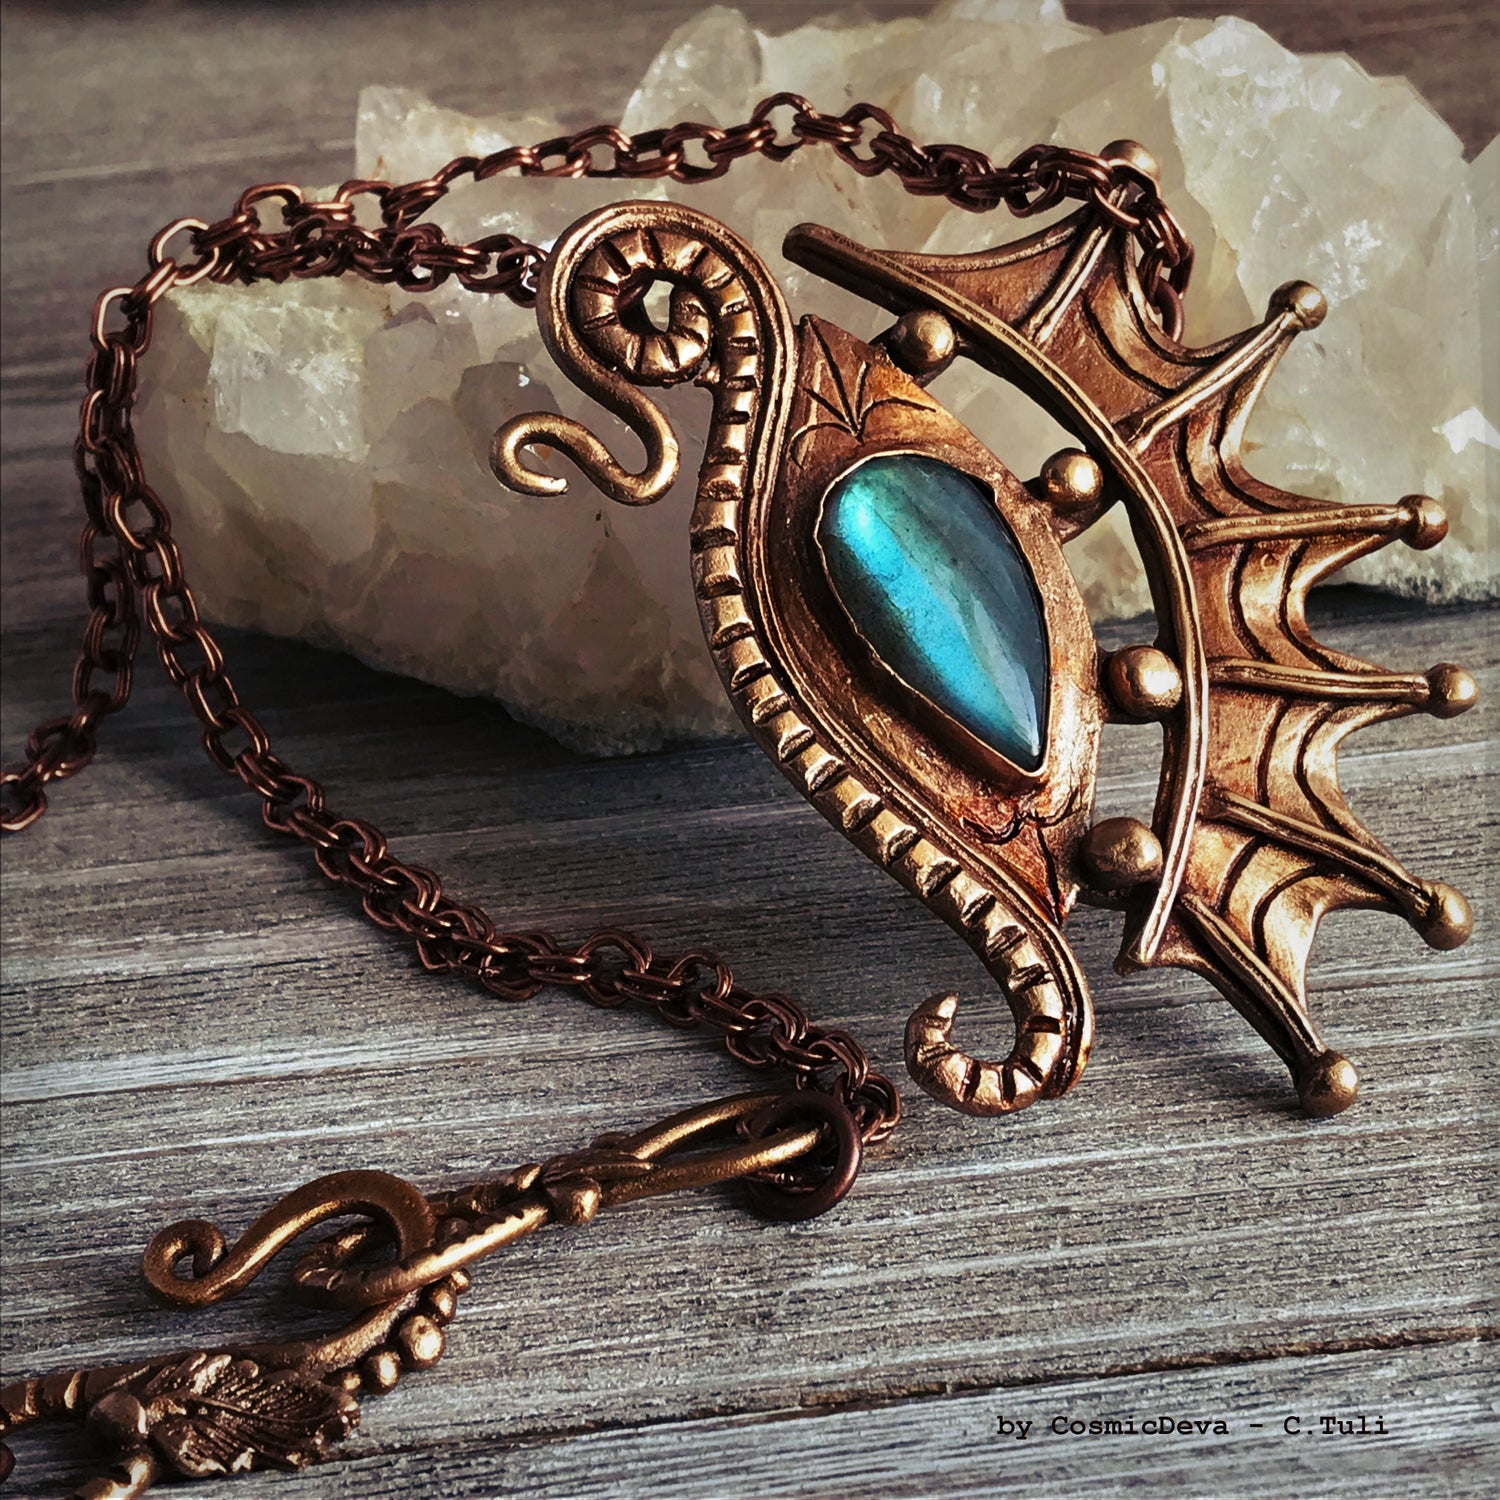 The Dragon is often seen as the guardian of a treasure. The treasure symbolizes you. This beautifully hand sculptured, carved, forged and kiln fired bronze pendant necklace symbolizes the Eye of a Dragon featuring a magical mystical shimmering labradorite gemstone. The reverse of the pendant is signed by the artist and carries the CosmicDeva brand hallmark.- CosmicDeva